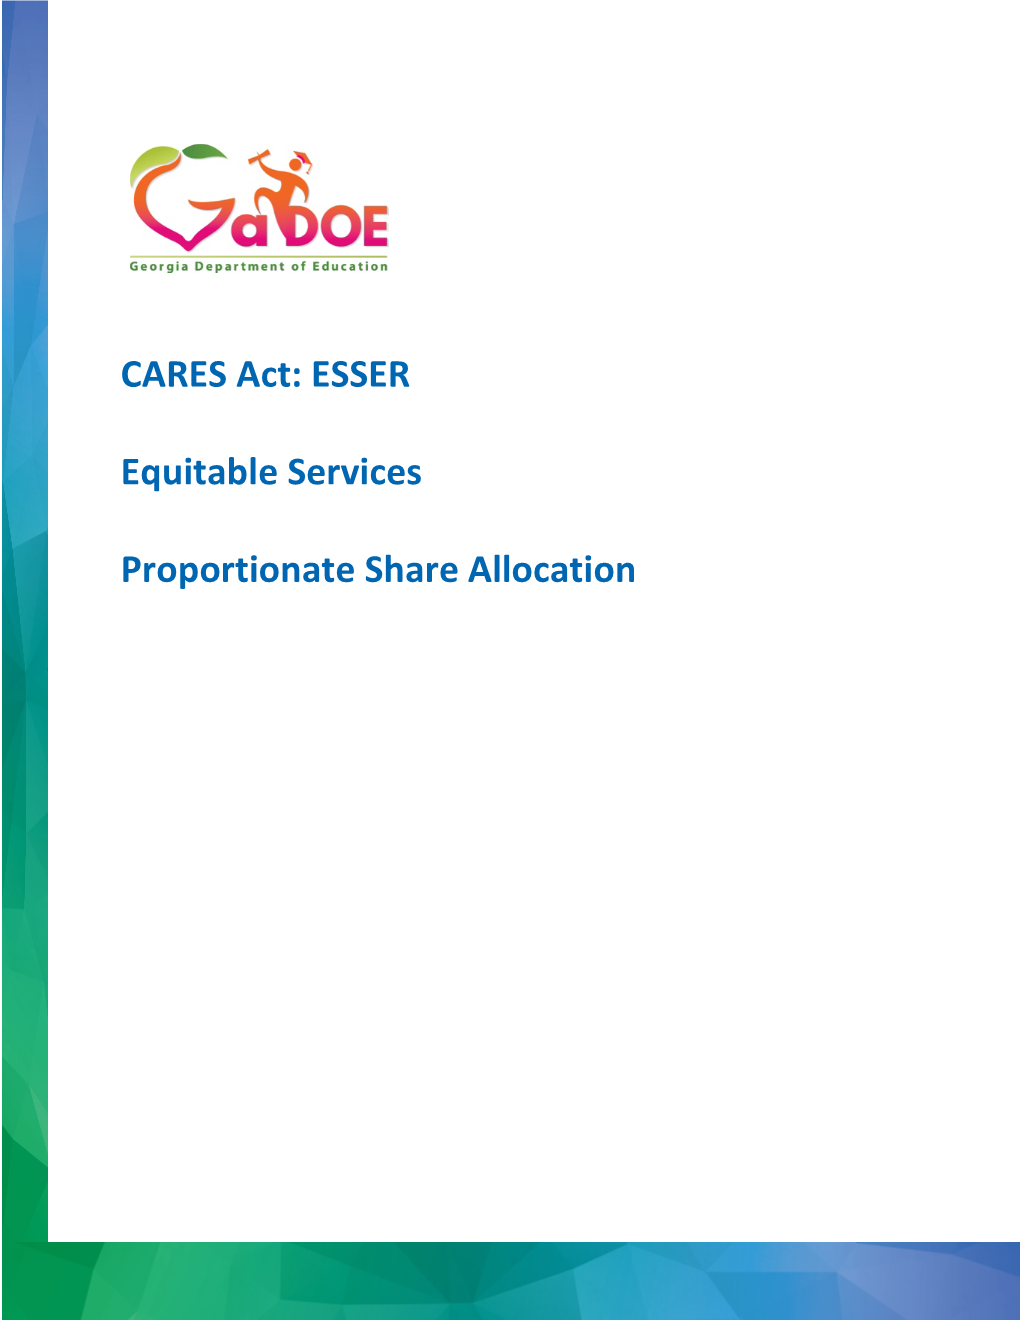 CARES Act: ESSER Equitable Services Proportionate Share